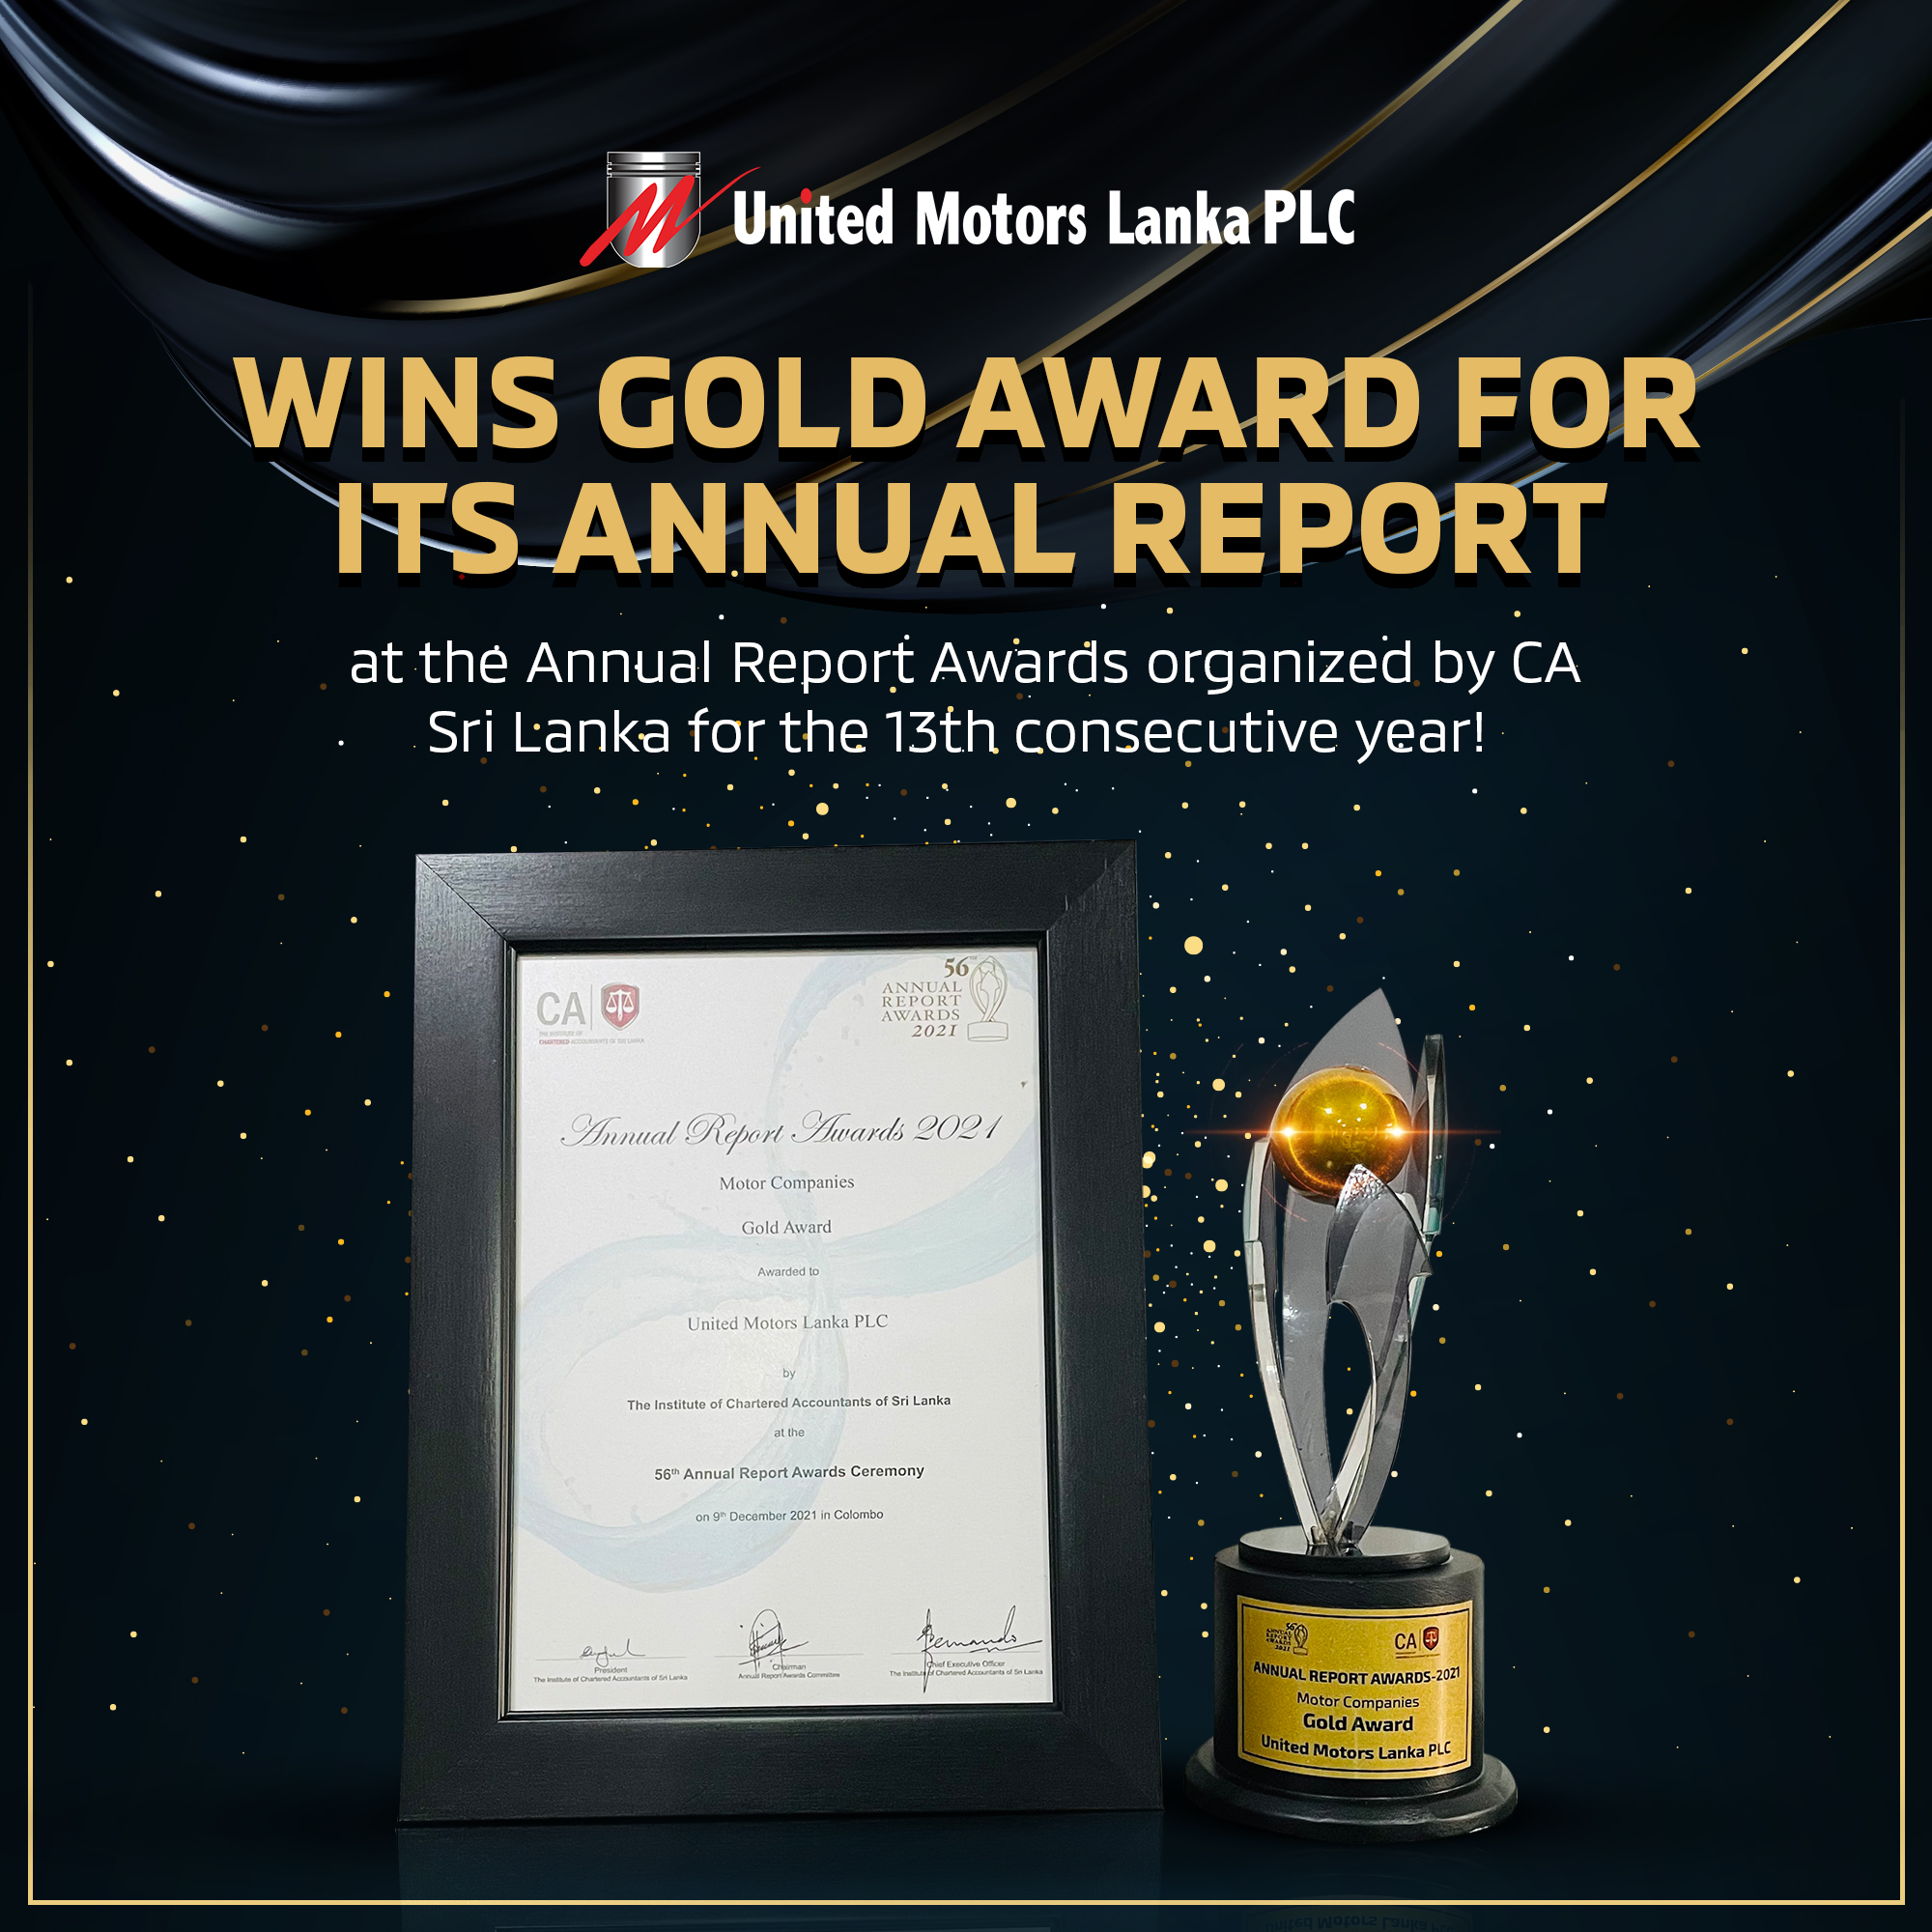 Wins Gold Award for its Annual Report